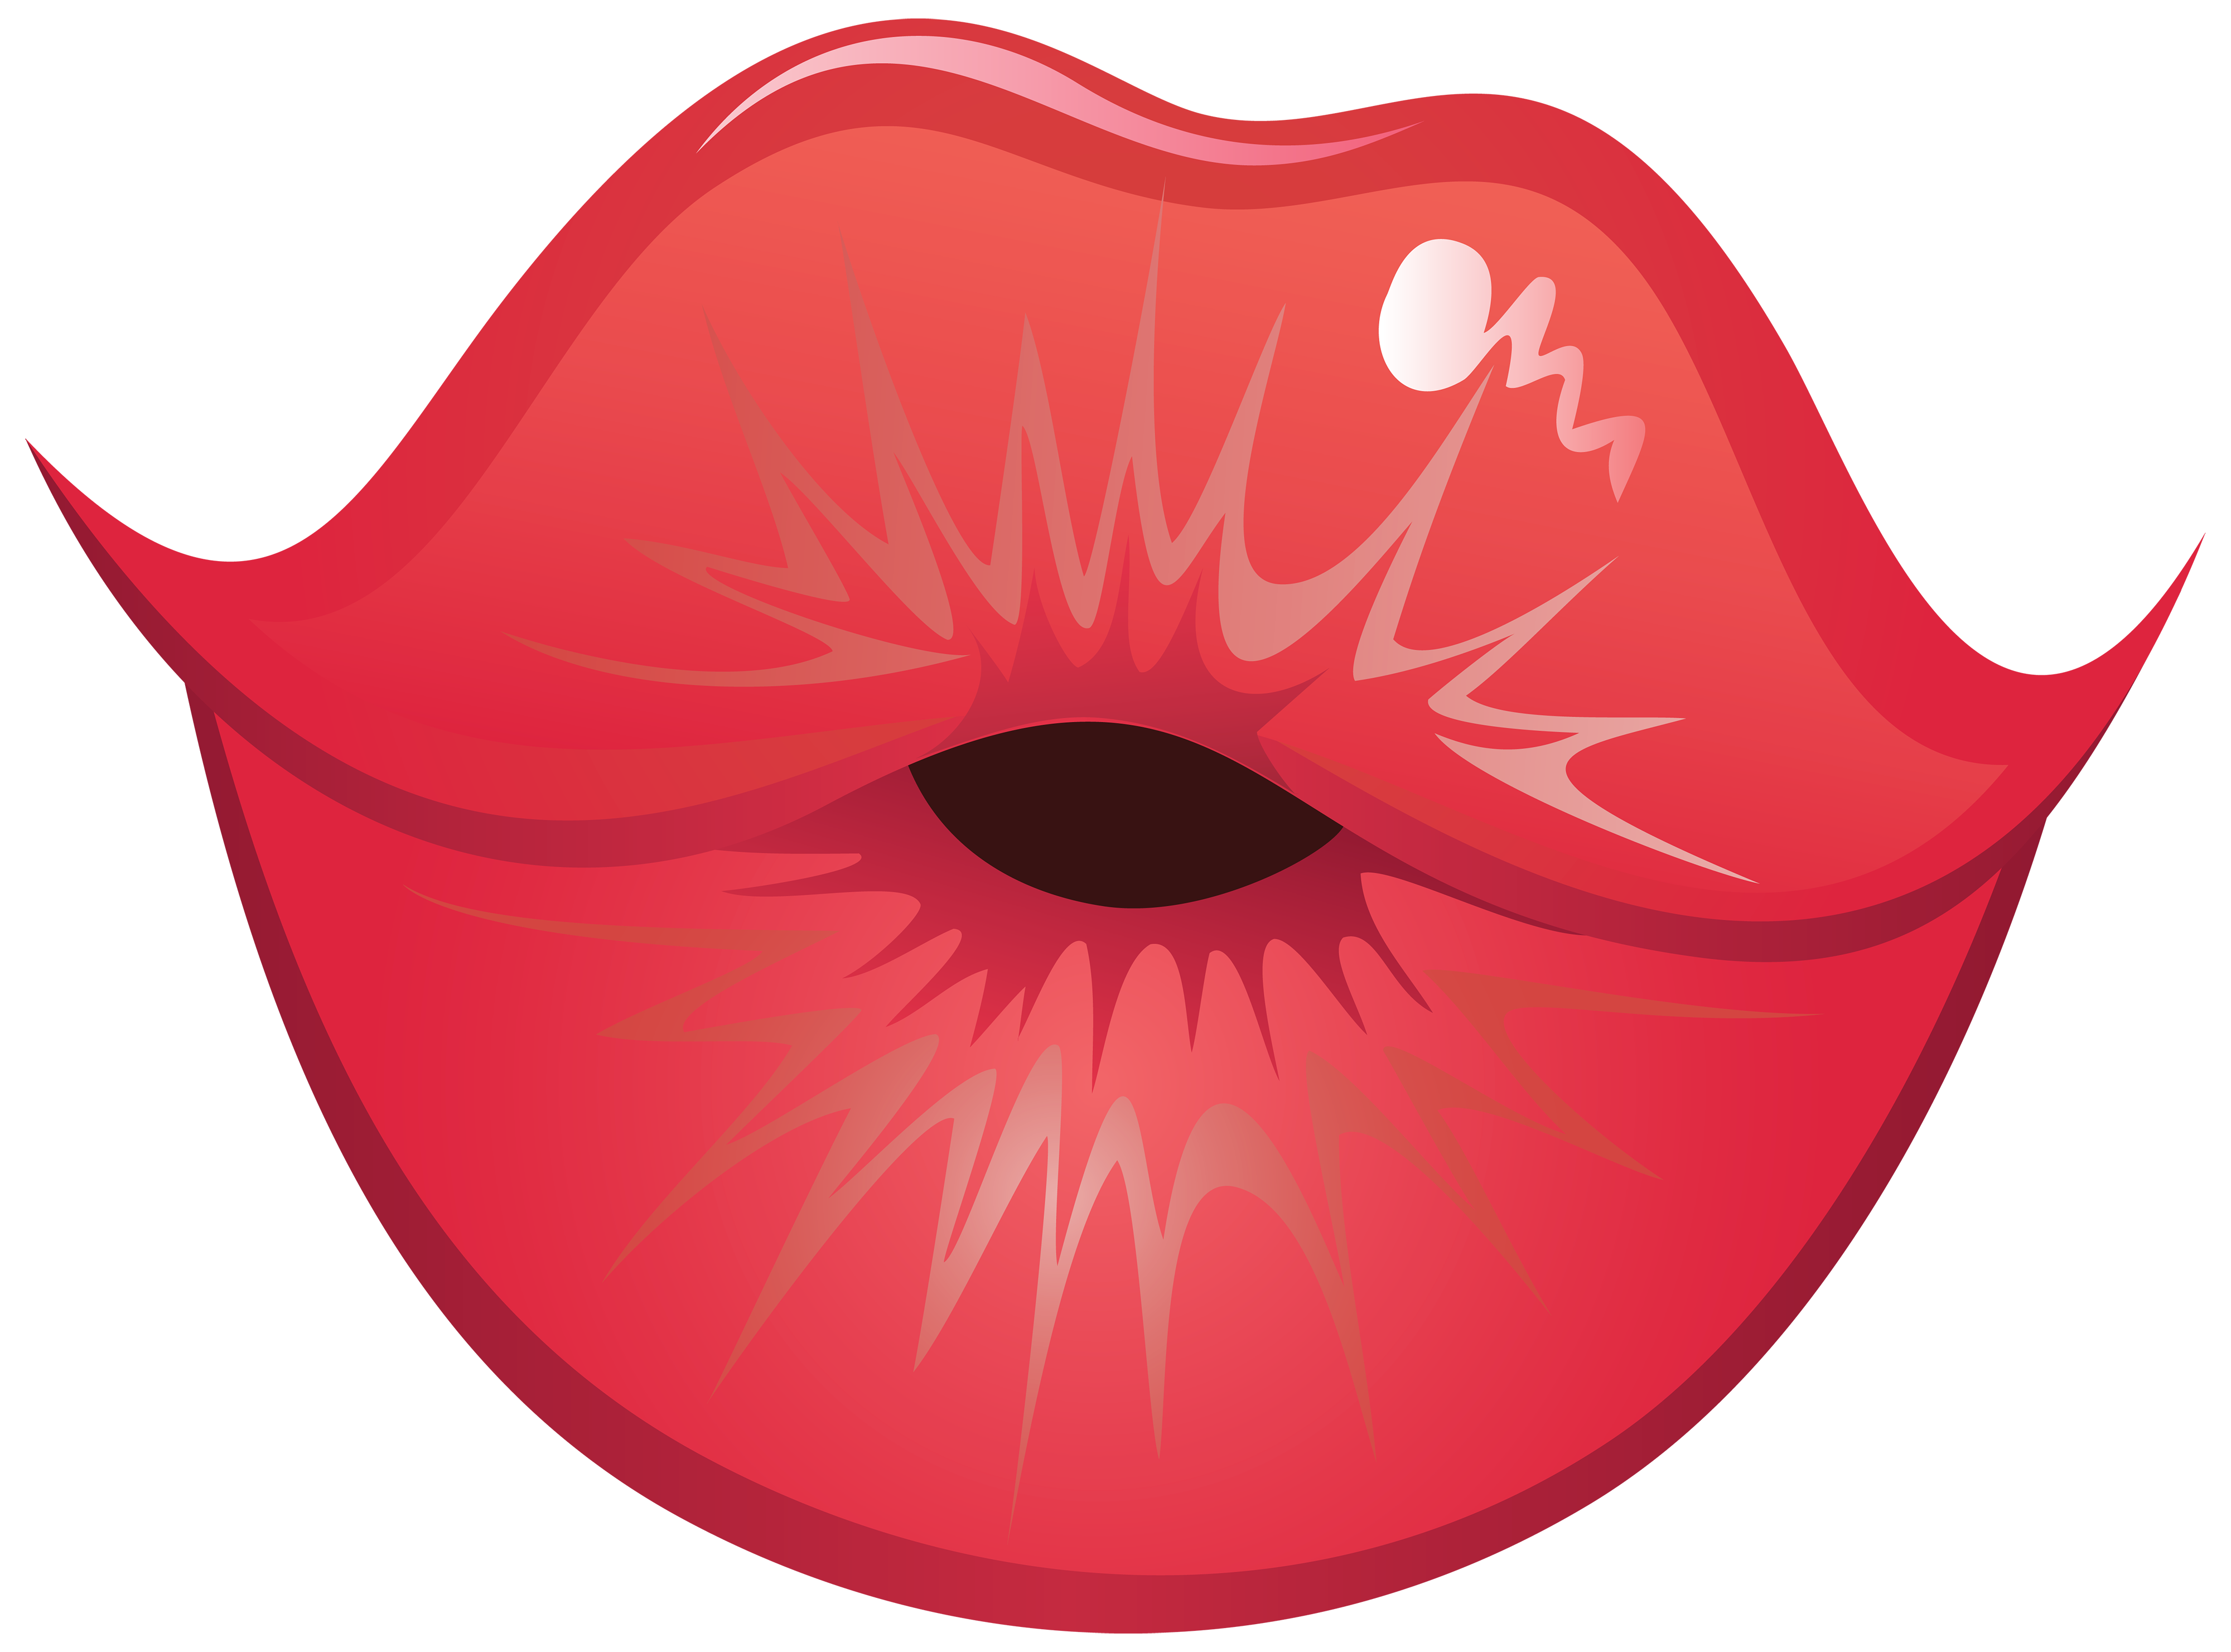 Cartoon Lips Mouth PNG Images Transparent Background | PNG Play